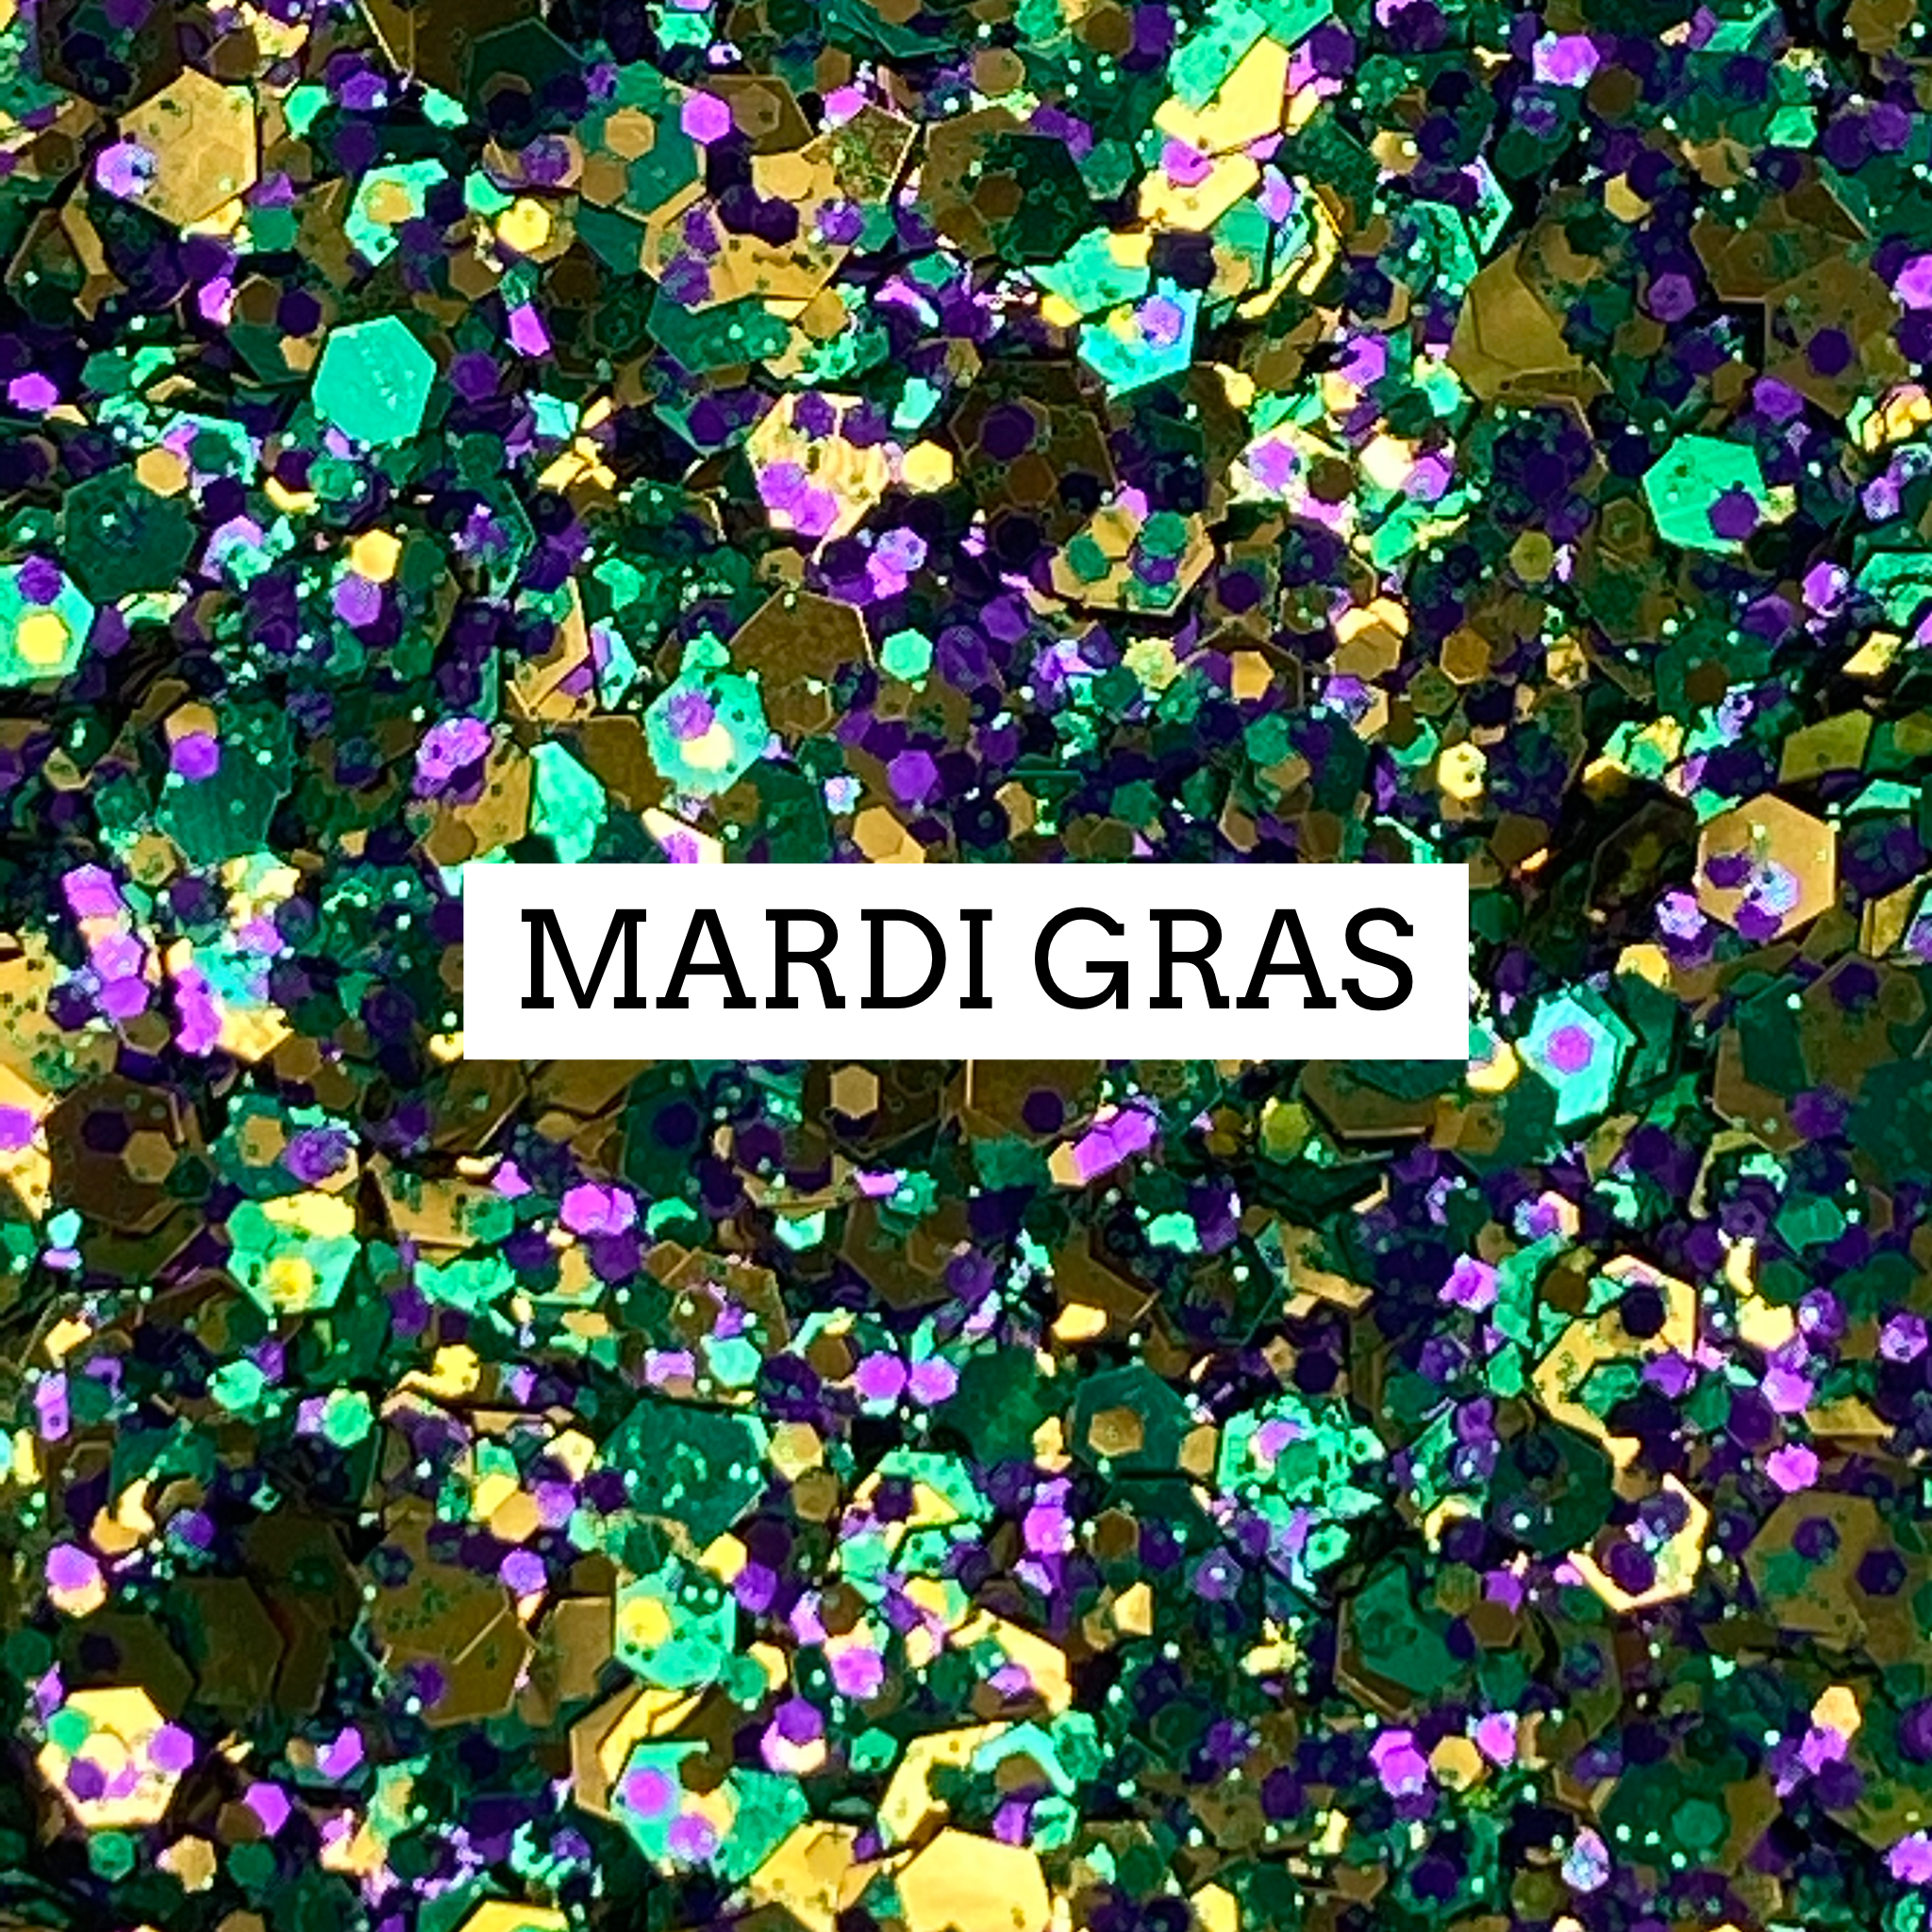 New 3-d designs for our Mardi Gras throws #mardigras #glitter #3d